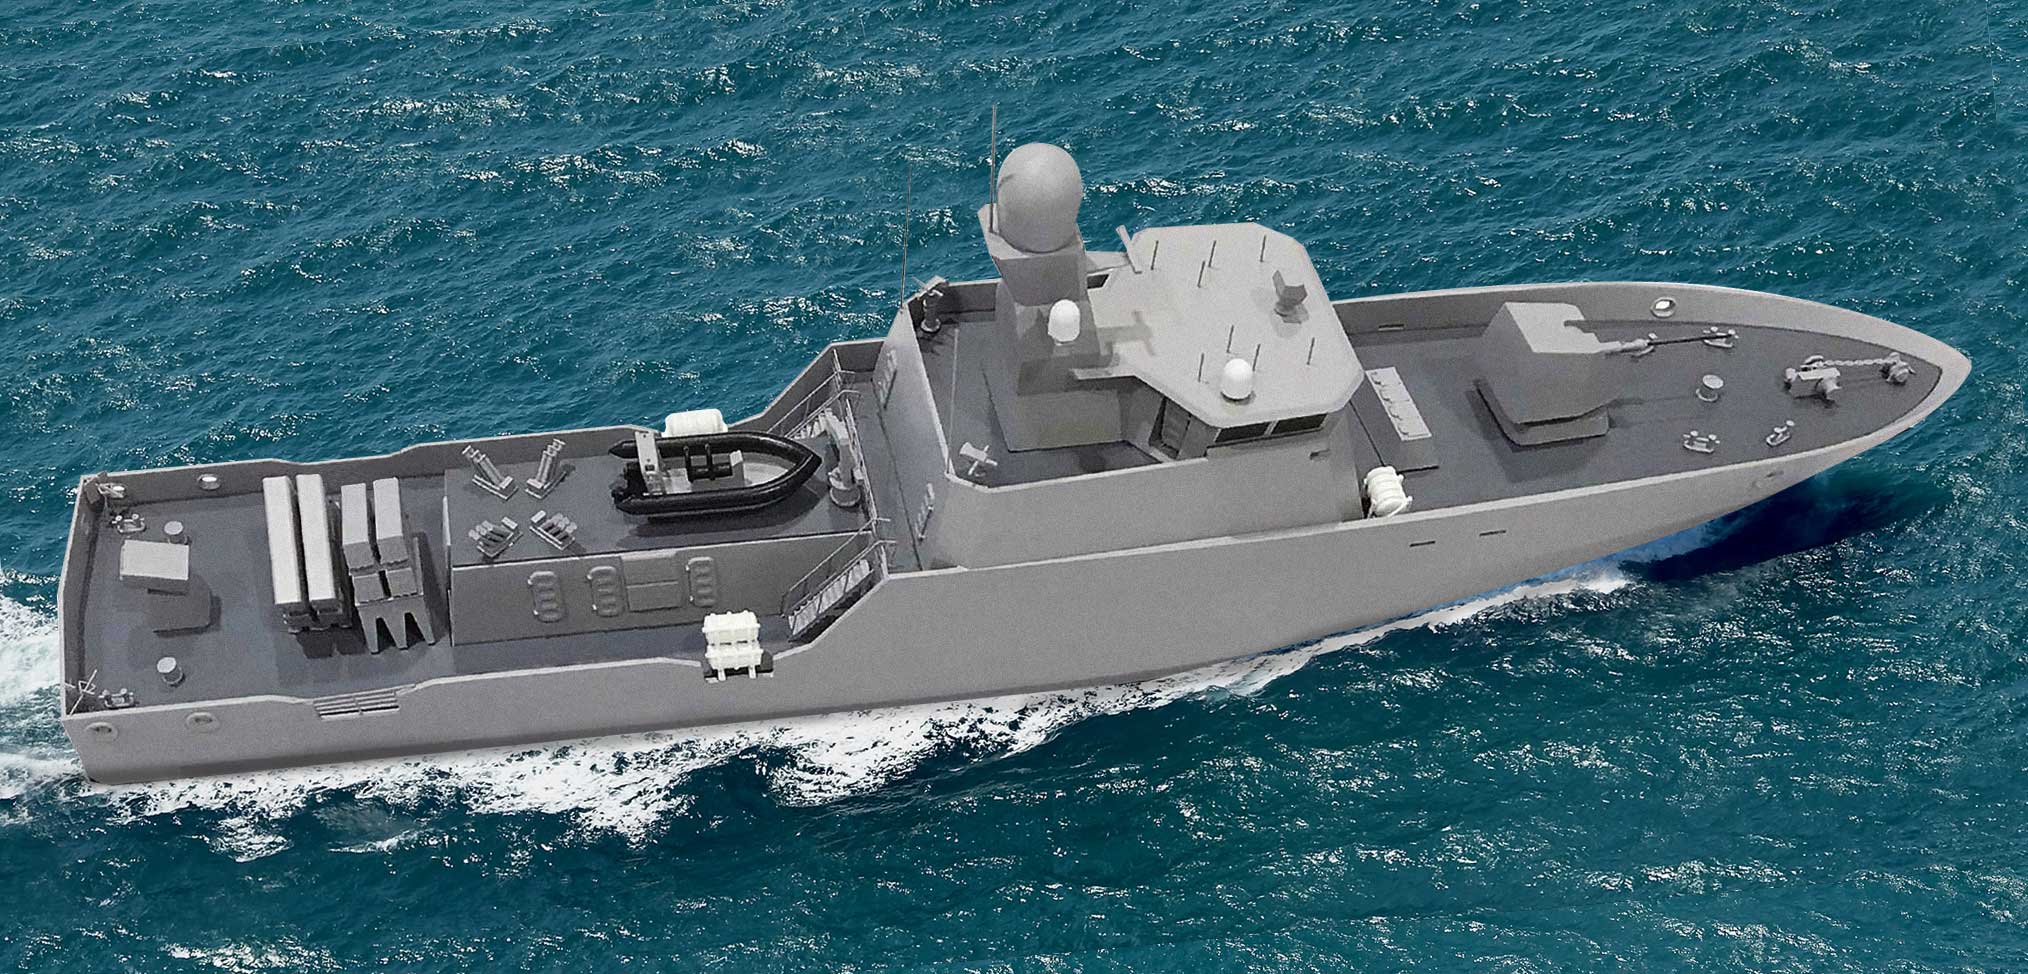 SMALL-WARSHIP-FRO-UKRAINE-TO-BE-BUILT-IN-SCOTLAND.jpg